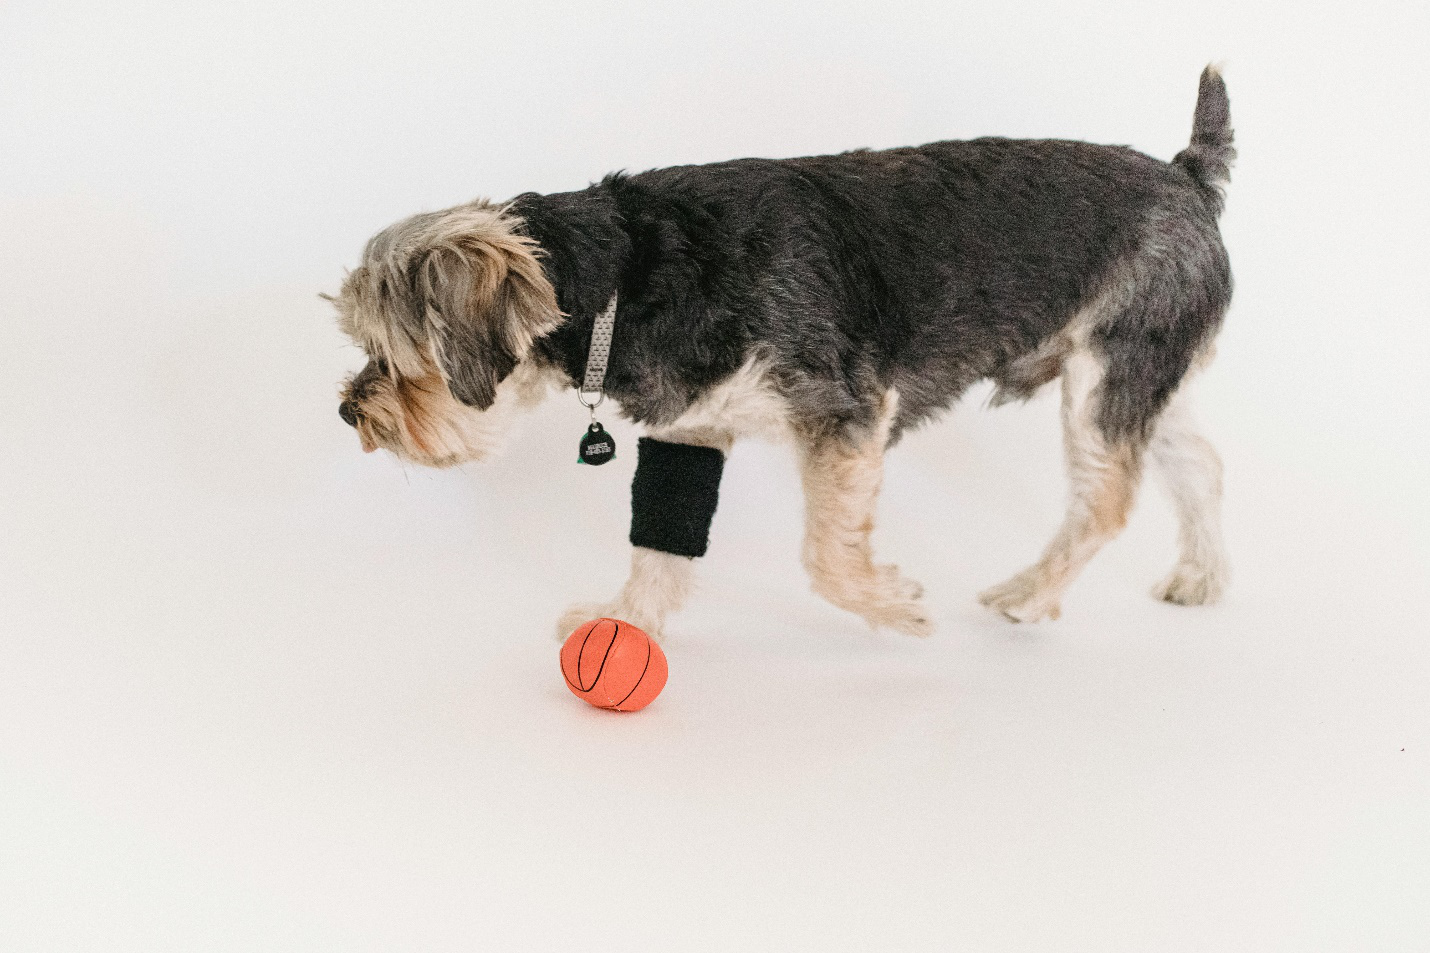 A senior dog strolls slowly with a support band on one leg and a small orange toy on the floor, showcasing the importance of dog daycare to look after pets in the owner's absence.